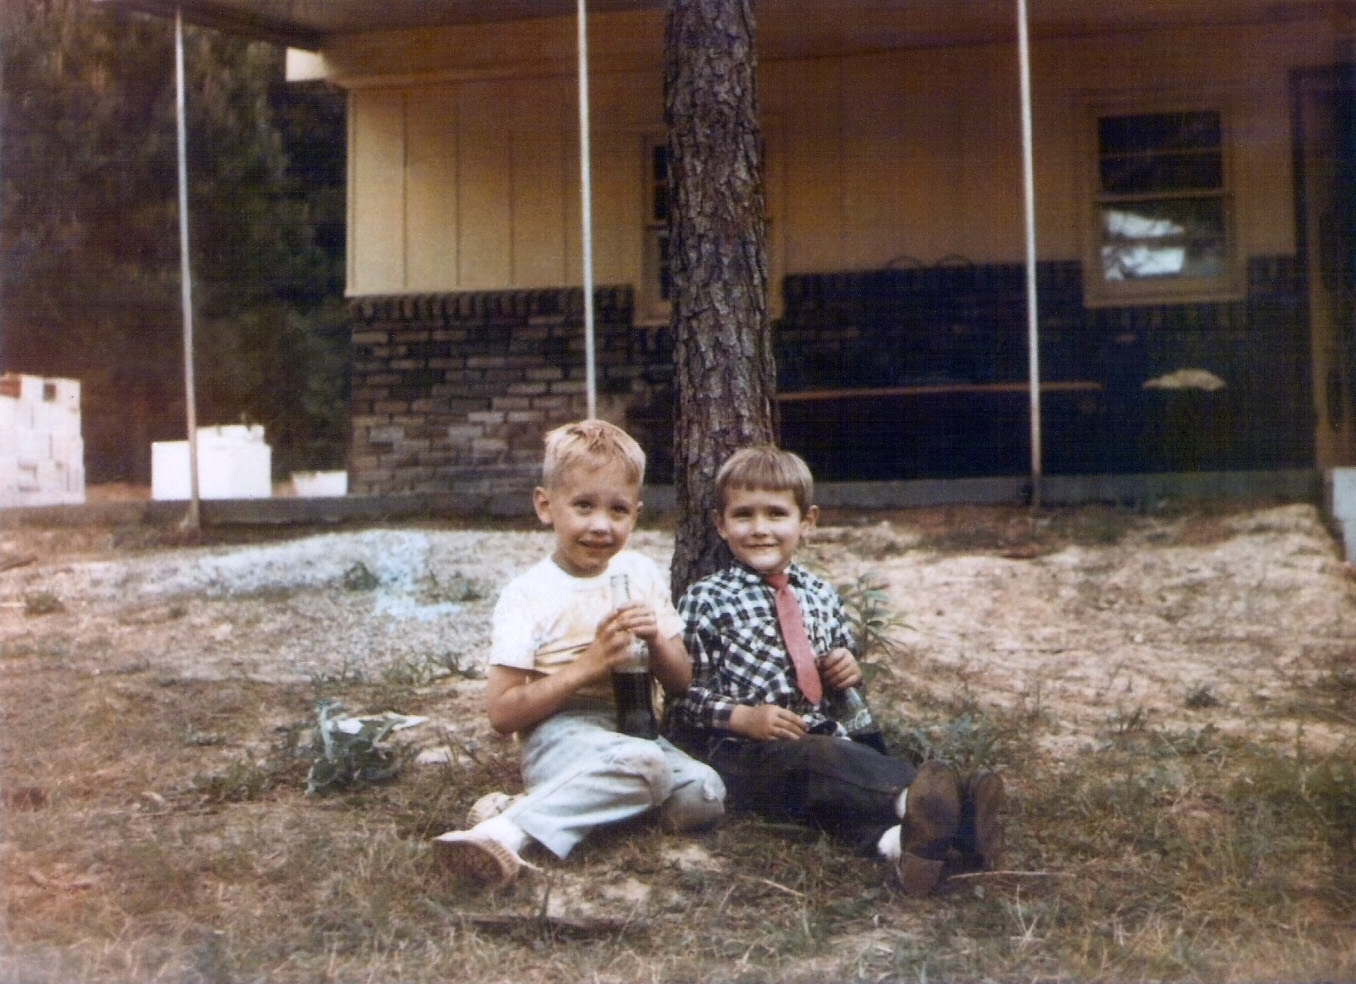 This is a photo of my cousin Troy, the kid wearing the red tie, and myself, the one in the dirty tee shirt on the left. It was taken in 1968 and depicts our great relief after being found by our parents after hours wandering in the Alabama backwoods behind Troy's house - the one in the photo. Troy wore ties at that time because he thought it made him look like Elvis Presley. Troy and I wandered onto a  neighbor's property who took us in and called our parents. View full size.